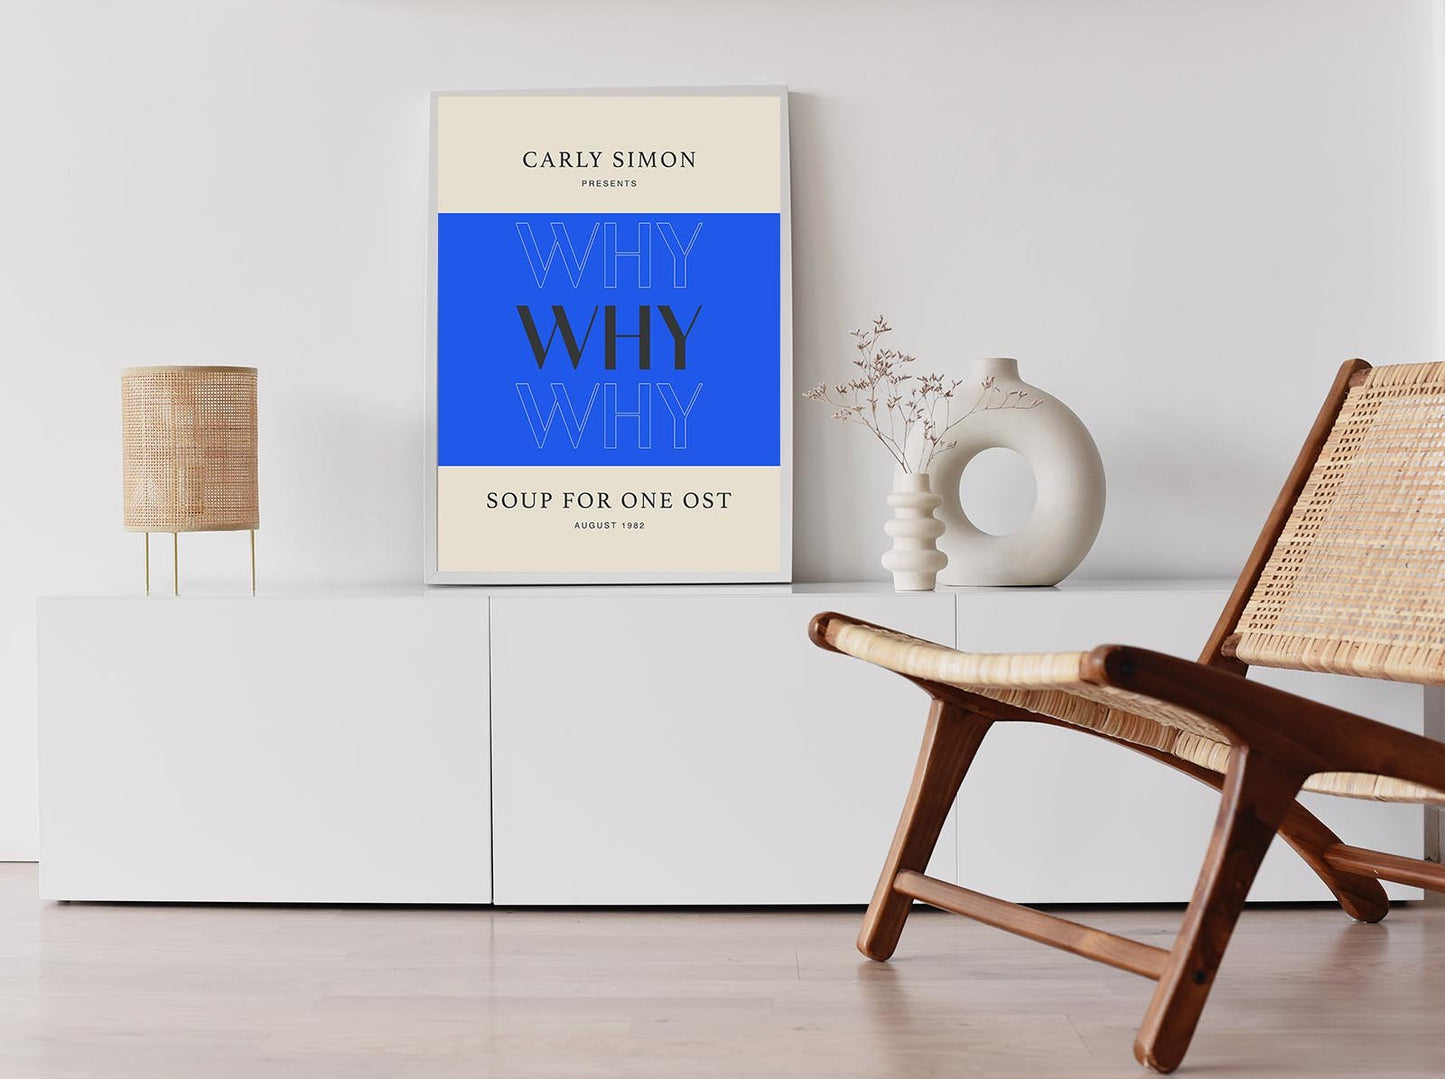 Why by Carly Simons